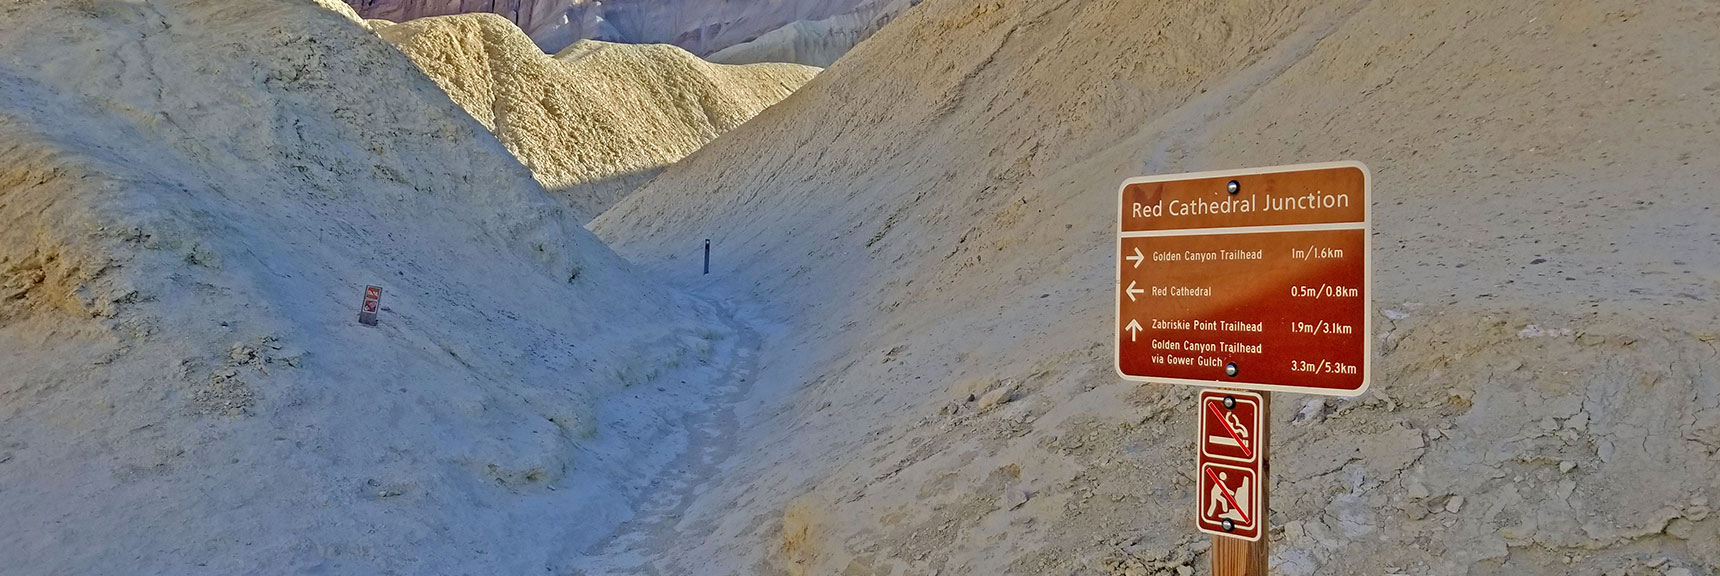 Arrival at Red Cathedral Junction. First Trail Junction in Golden Canyon. | Golden Canyon to Zabriskie Point | Death Valley National Park, California